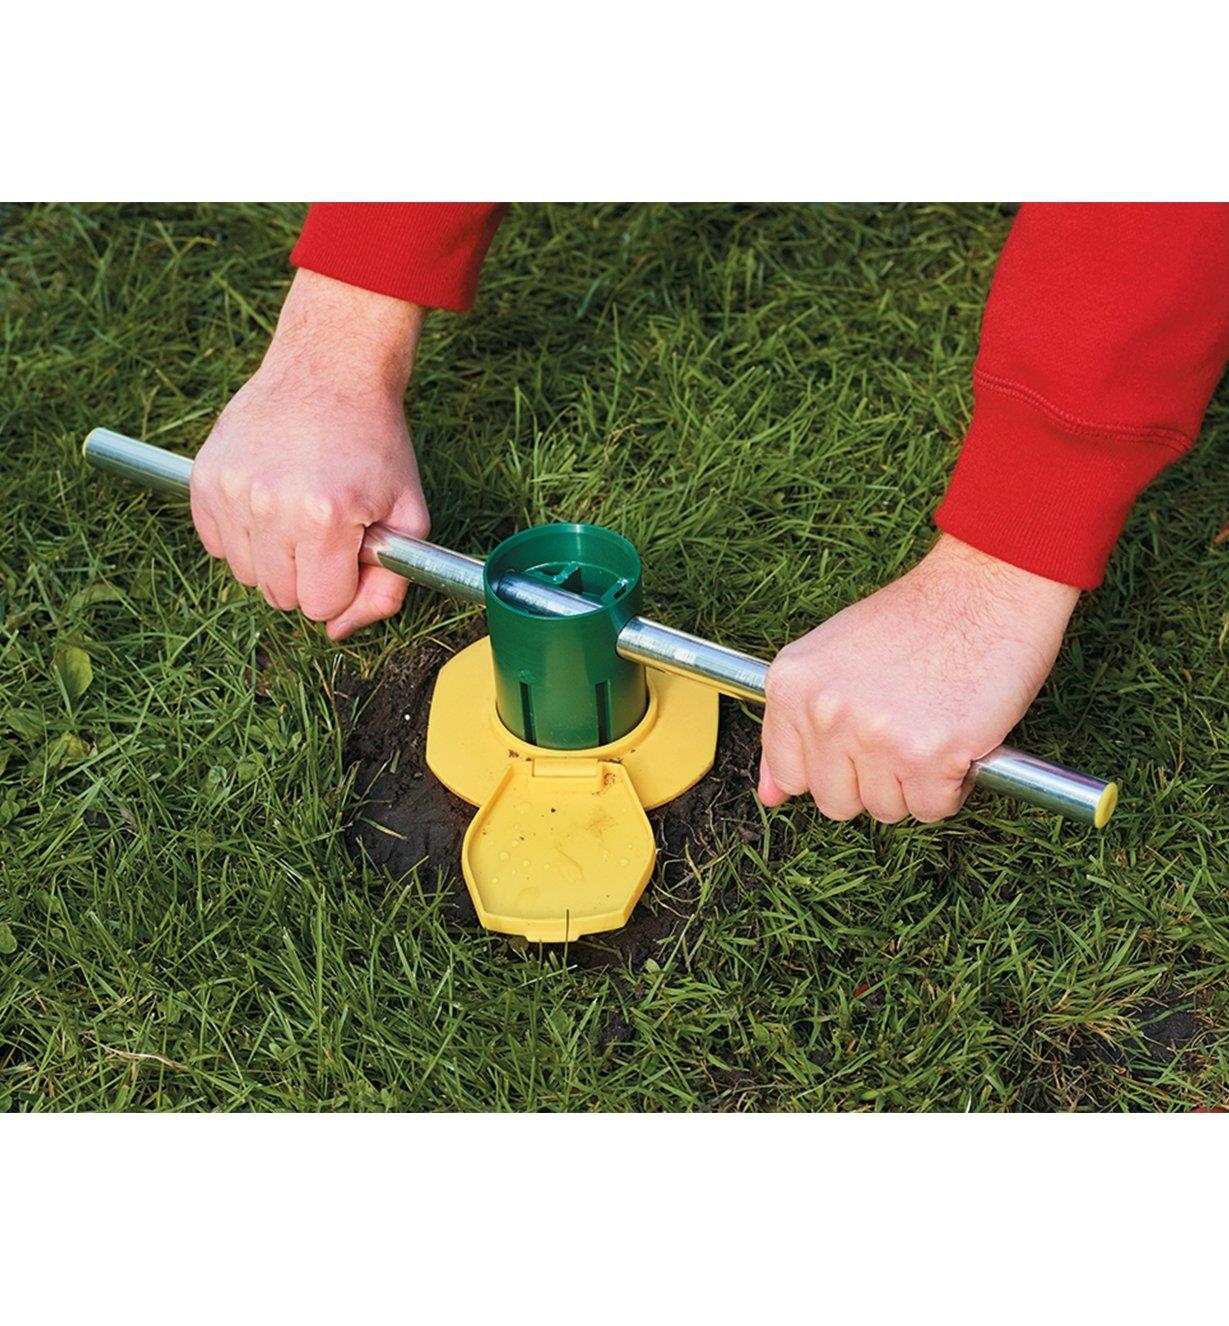 Installing the ground screw anchor by twisting it into the ground using a metal bar